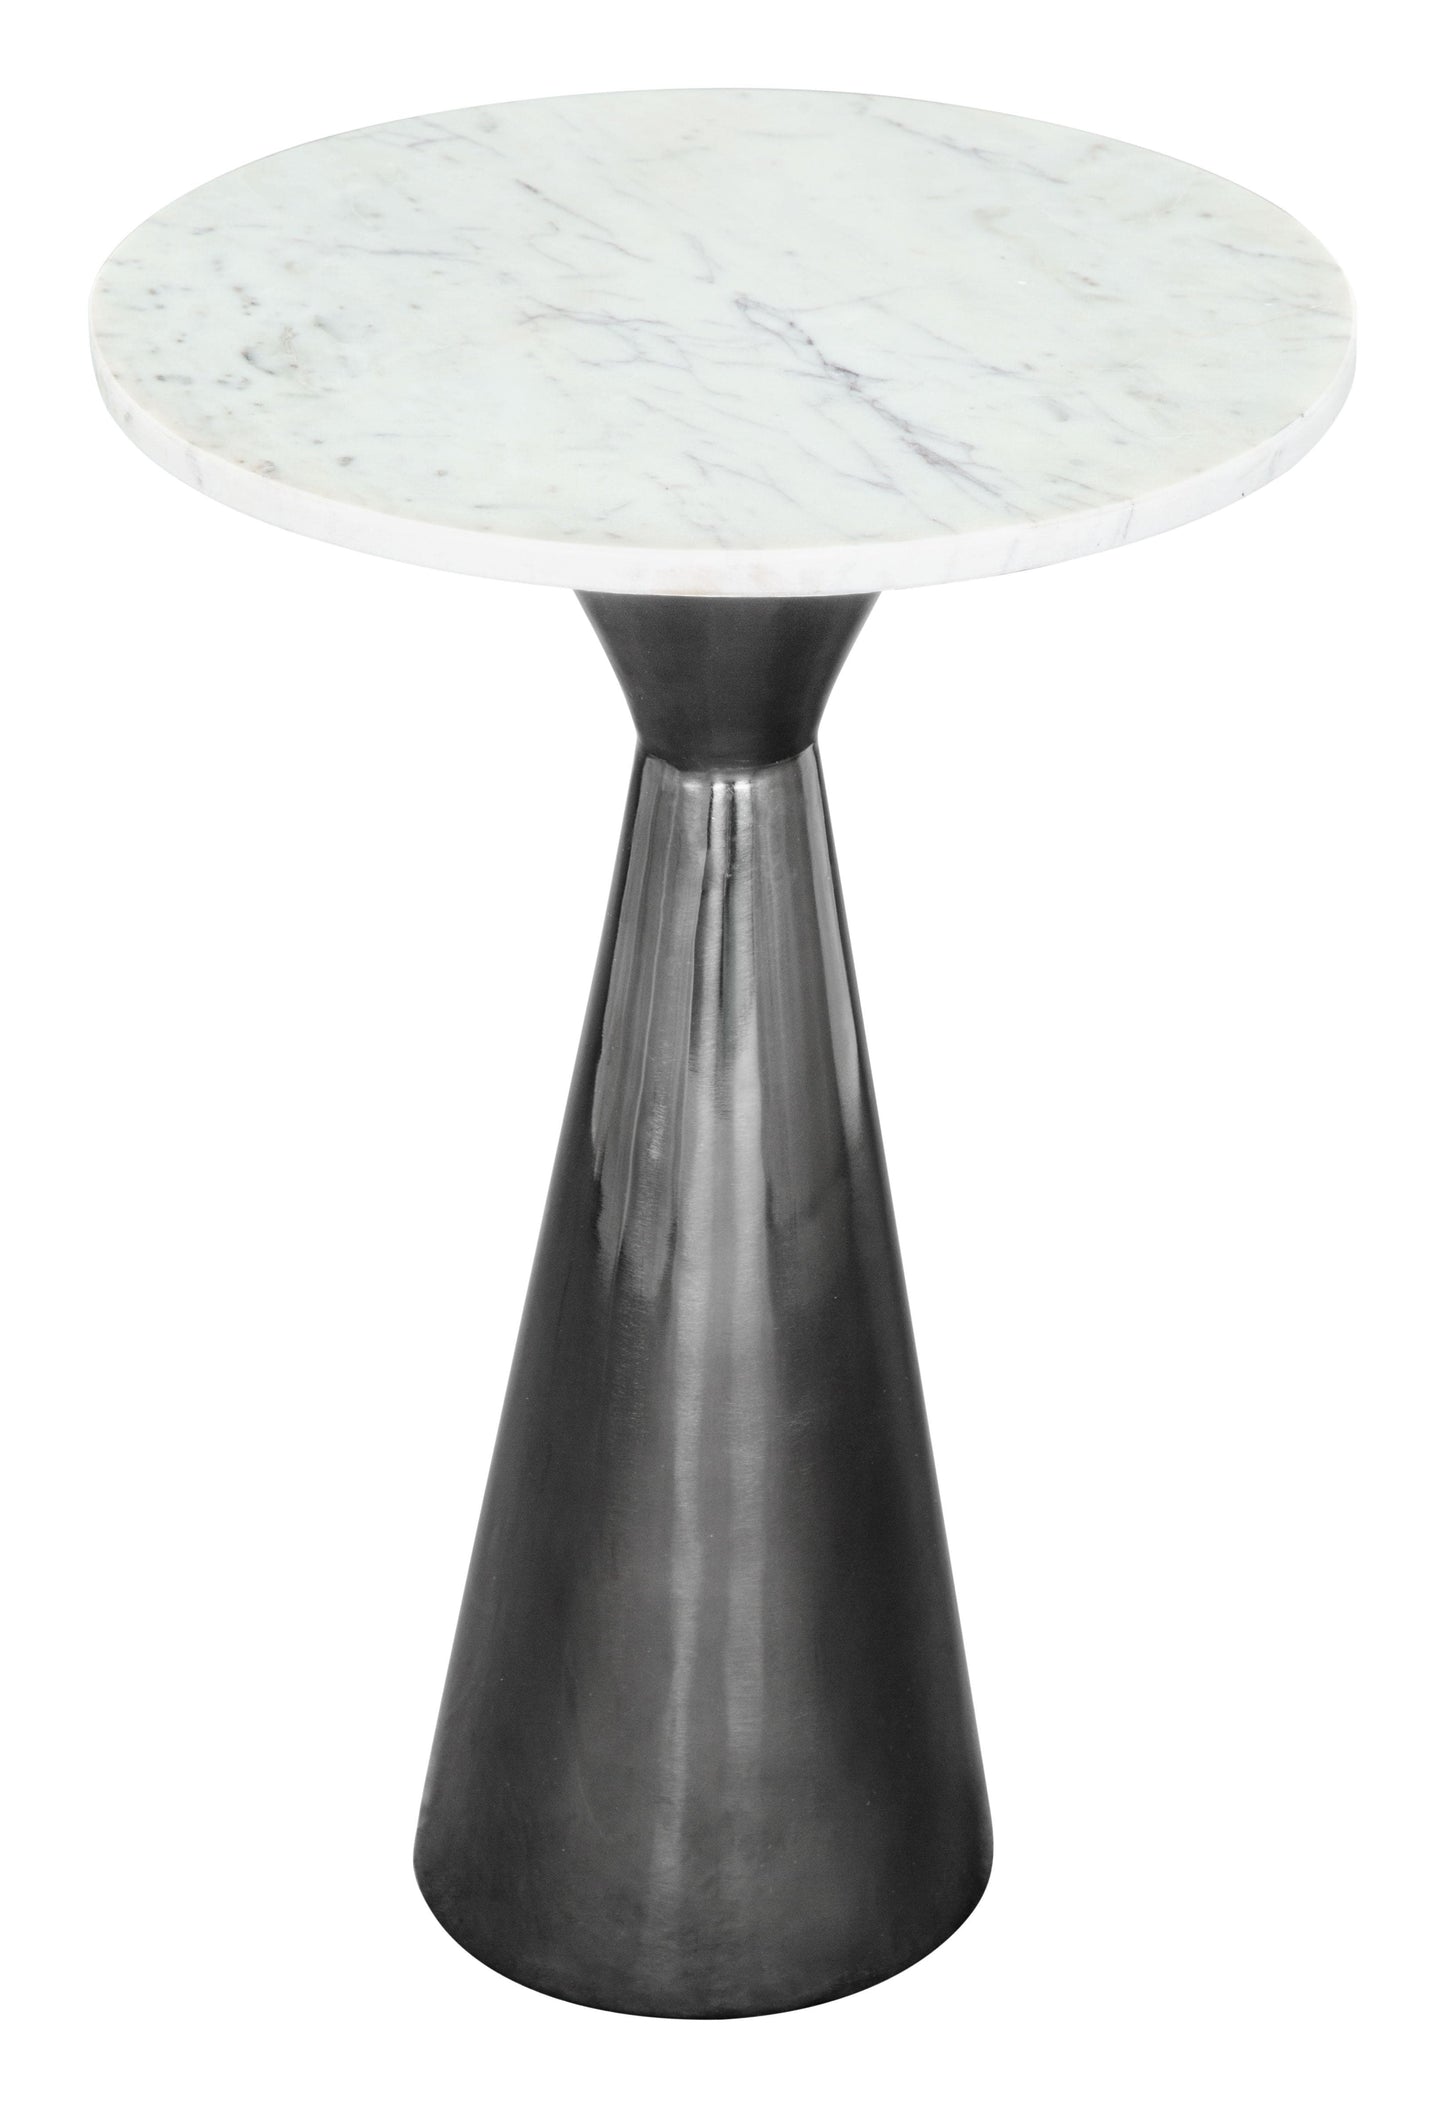 Marble Top Hospitality Grade Drink Table